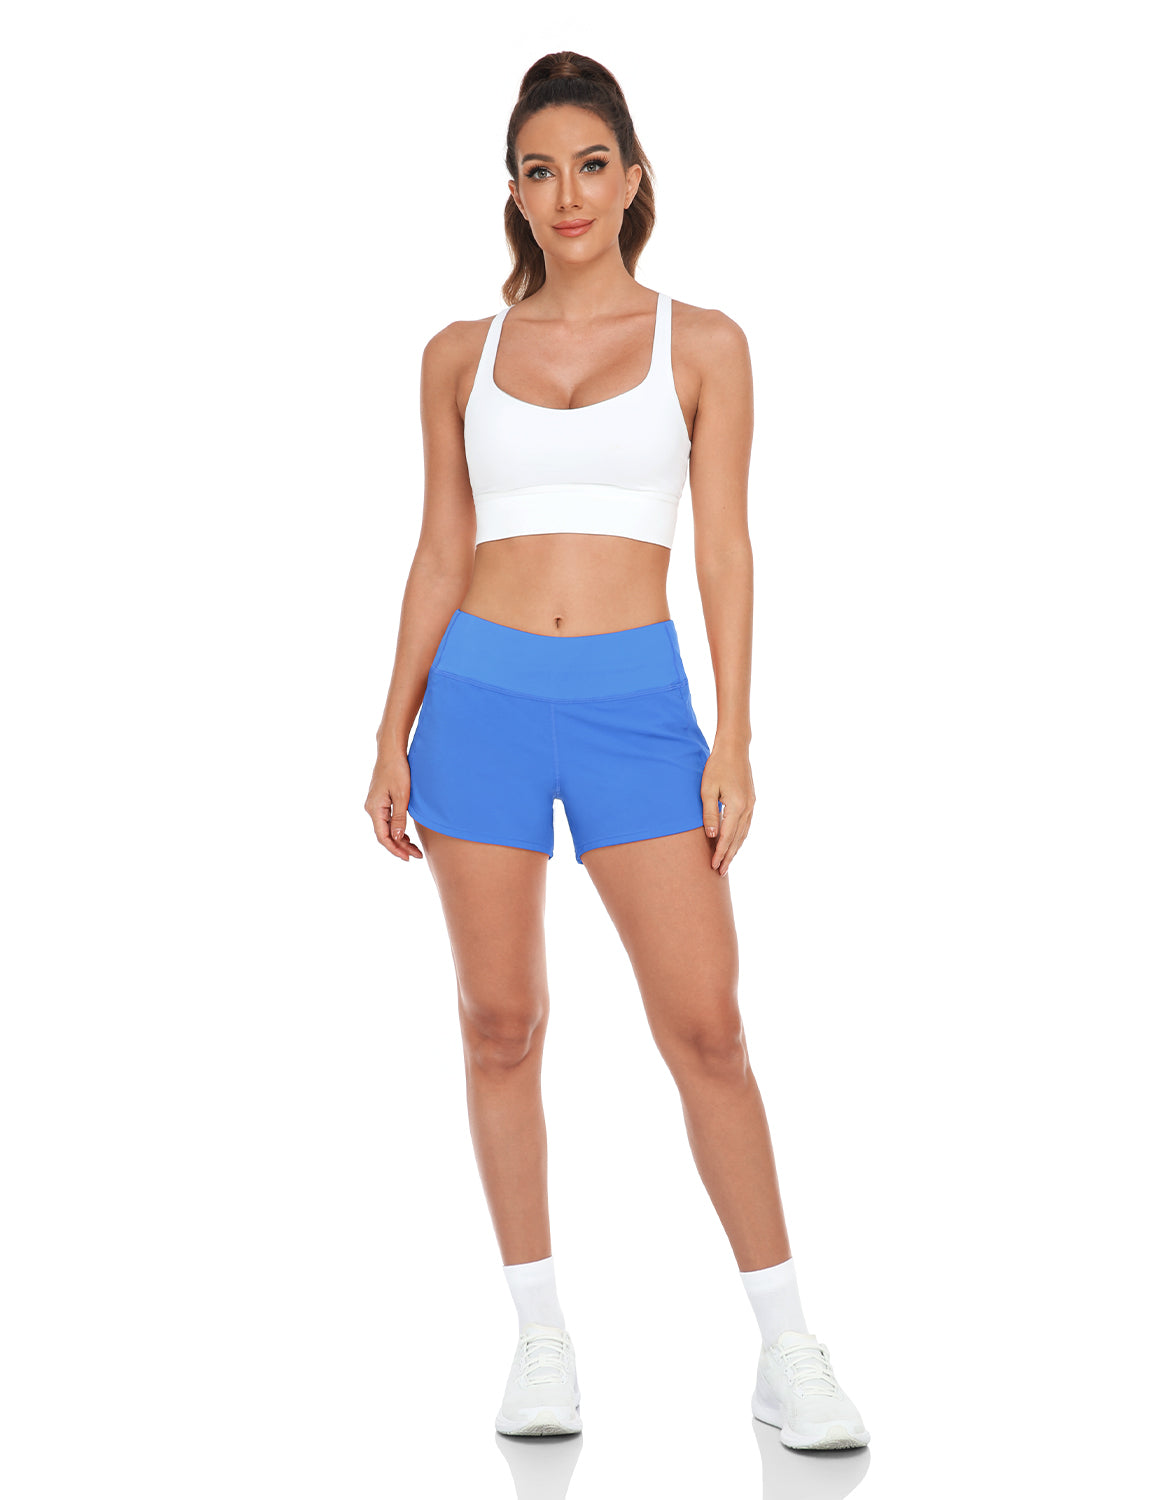 HeyNuts Focus Running Shorts for Women, Mid Waisted Athletic